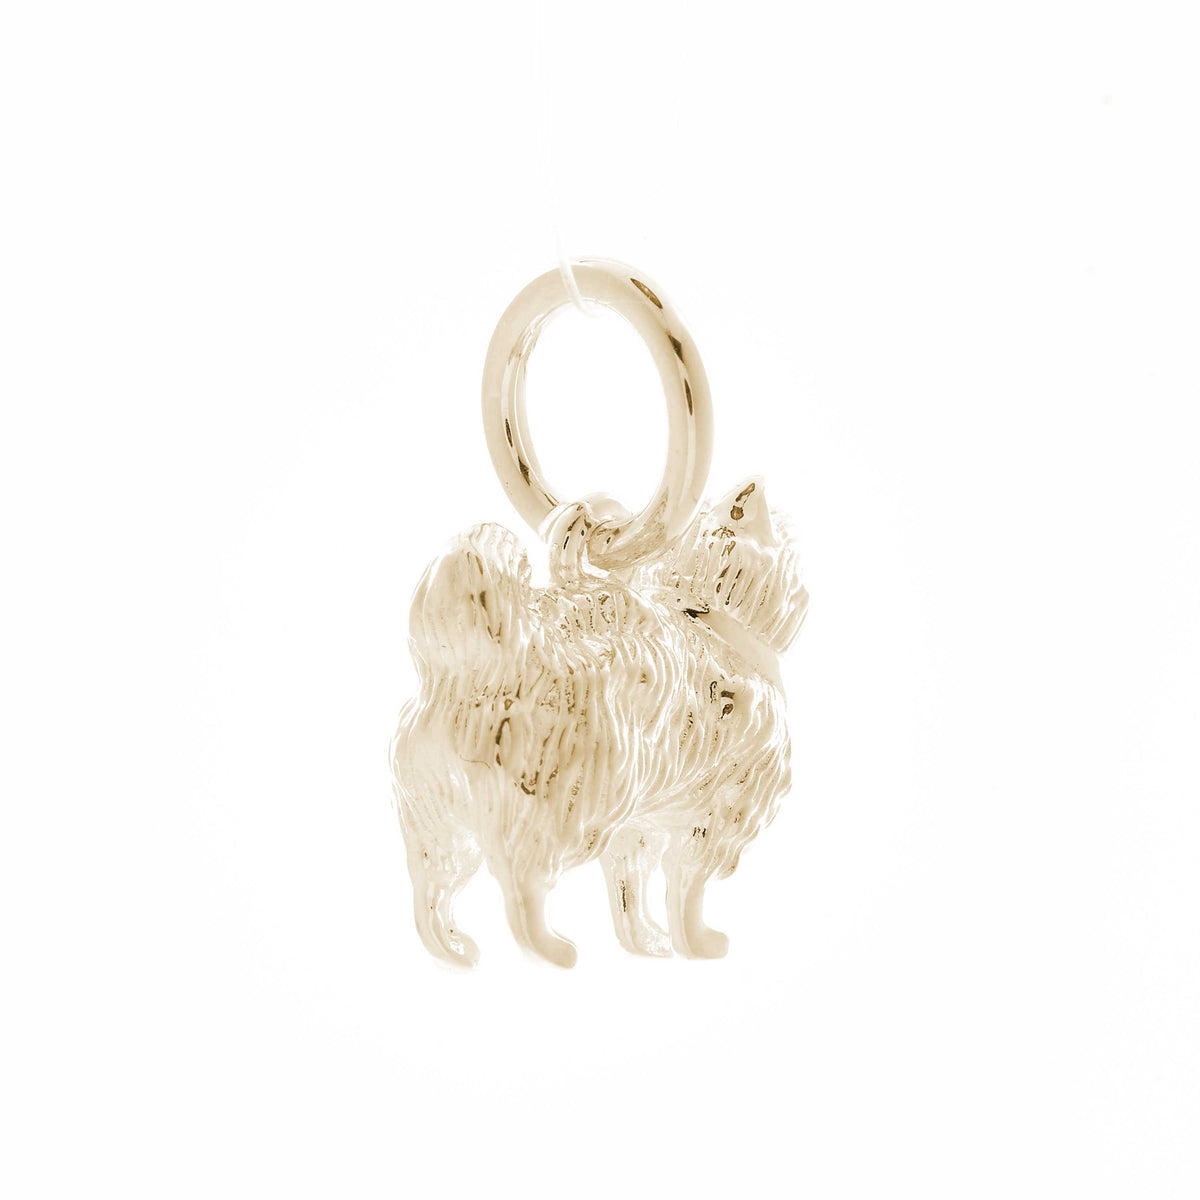 Solid 9ct gold Pomeranian charm with tiny bandana (optional), perfect for a charm bracelet or necklace.